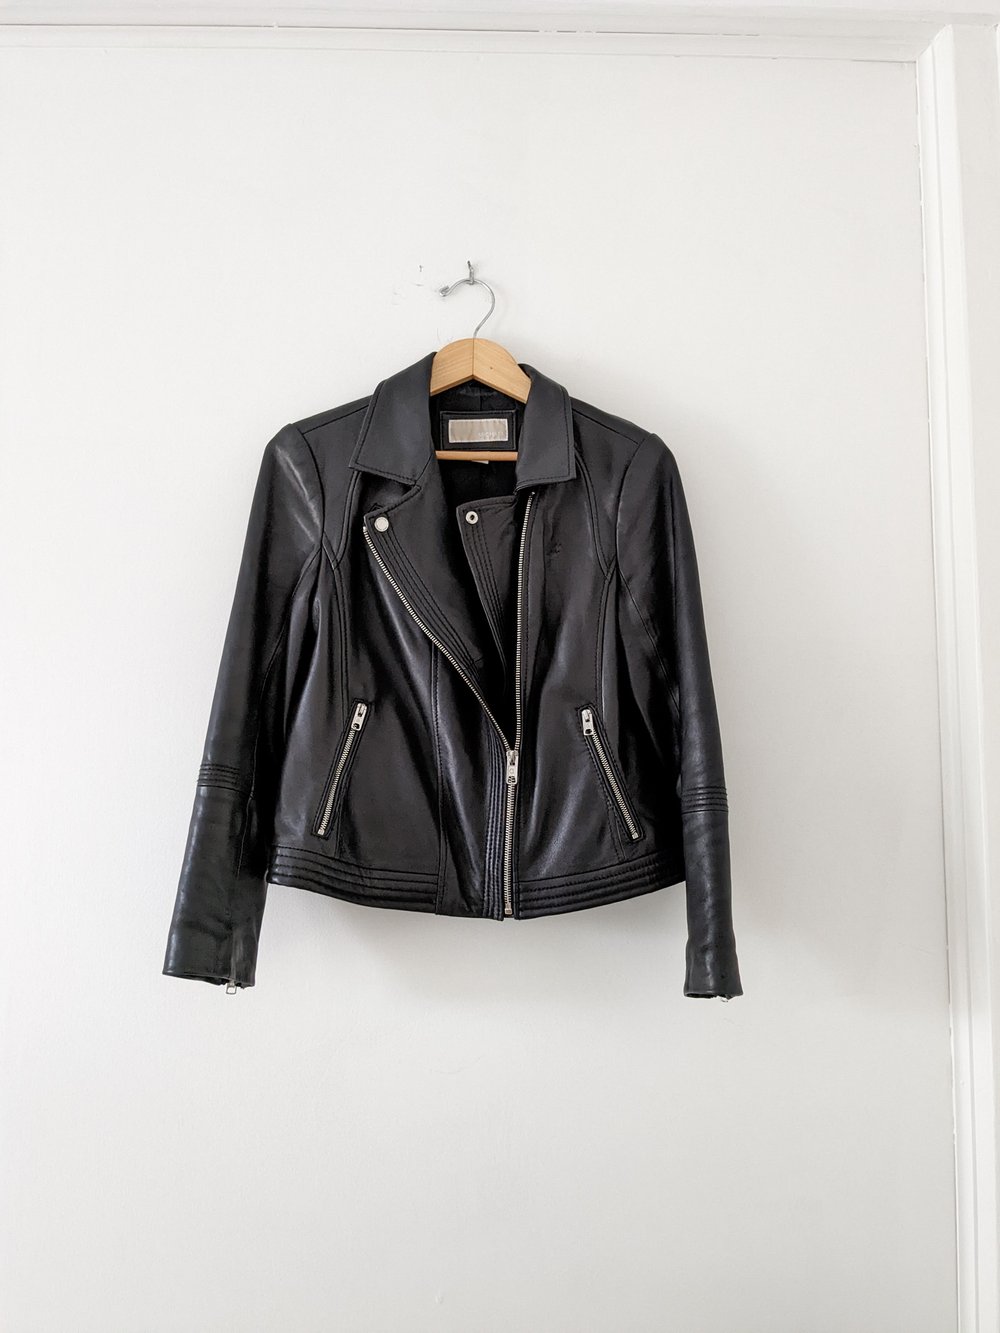 Michael Kors Leather Jacket | Large — Evergreen Consignment Studio | Buy &  Sell Pre-Loved Clothing.